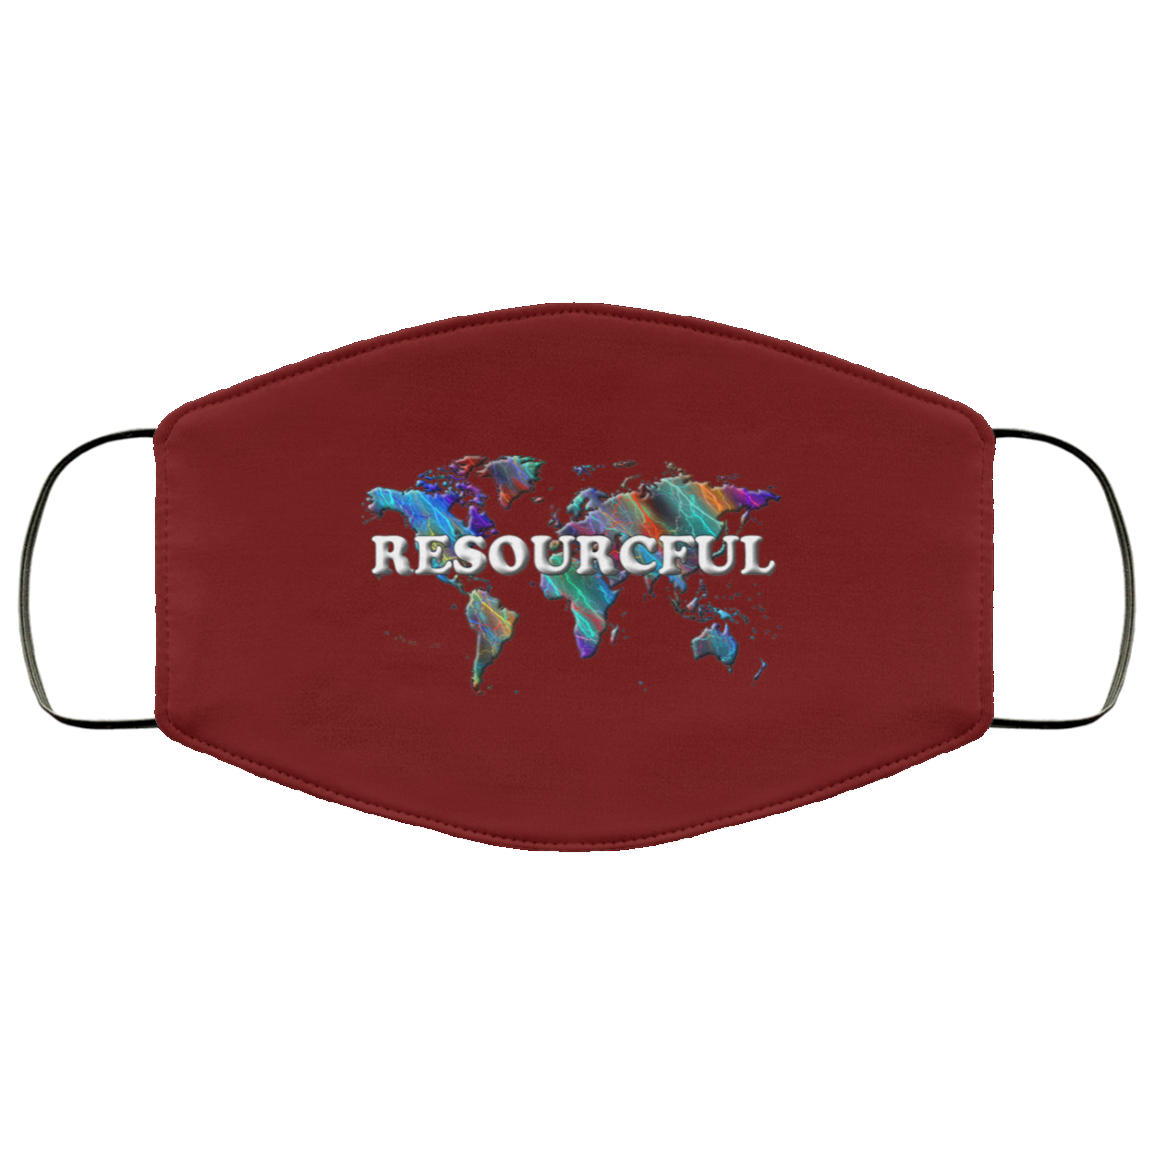 Resourceful 2 Layer Protective Mask